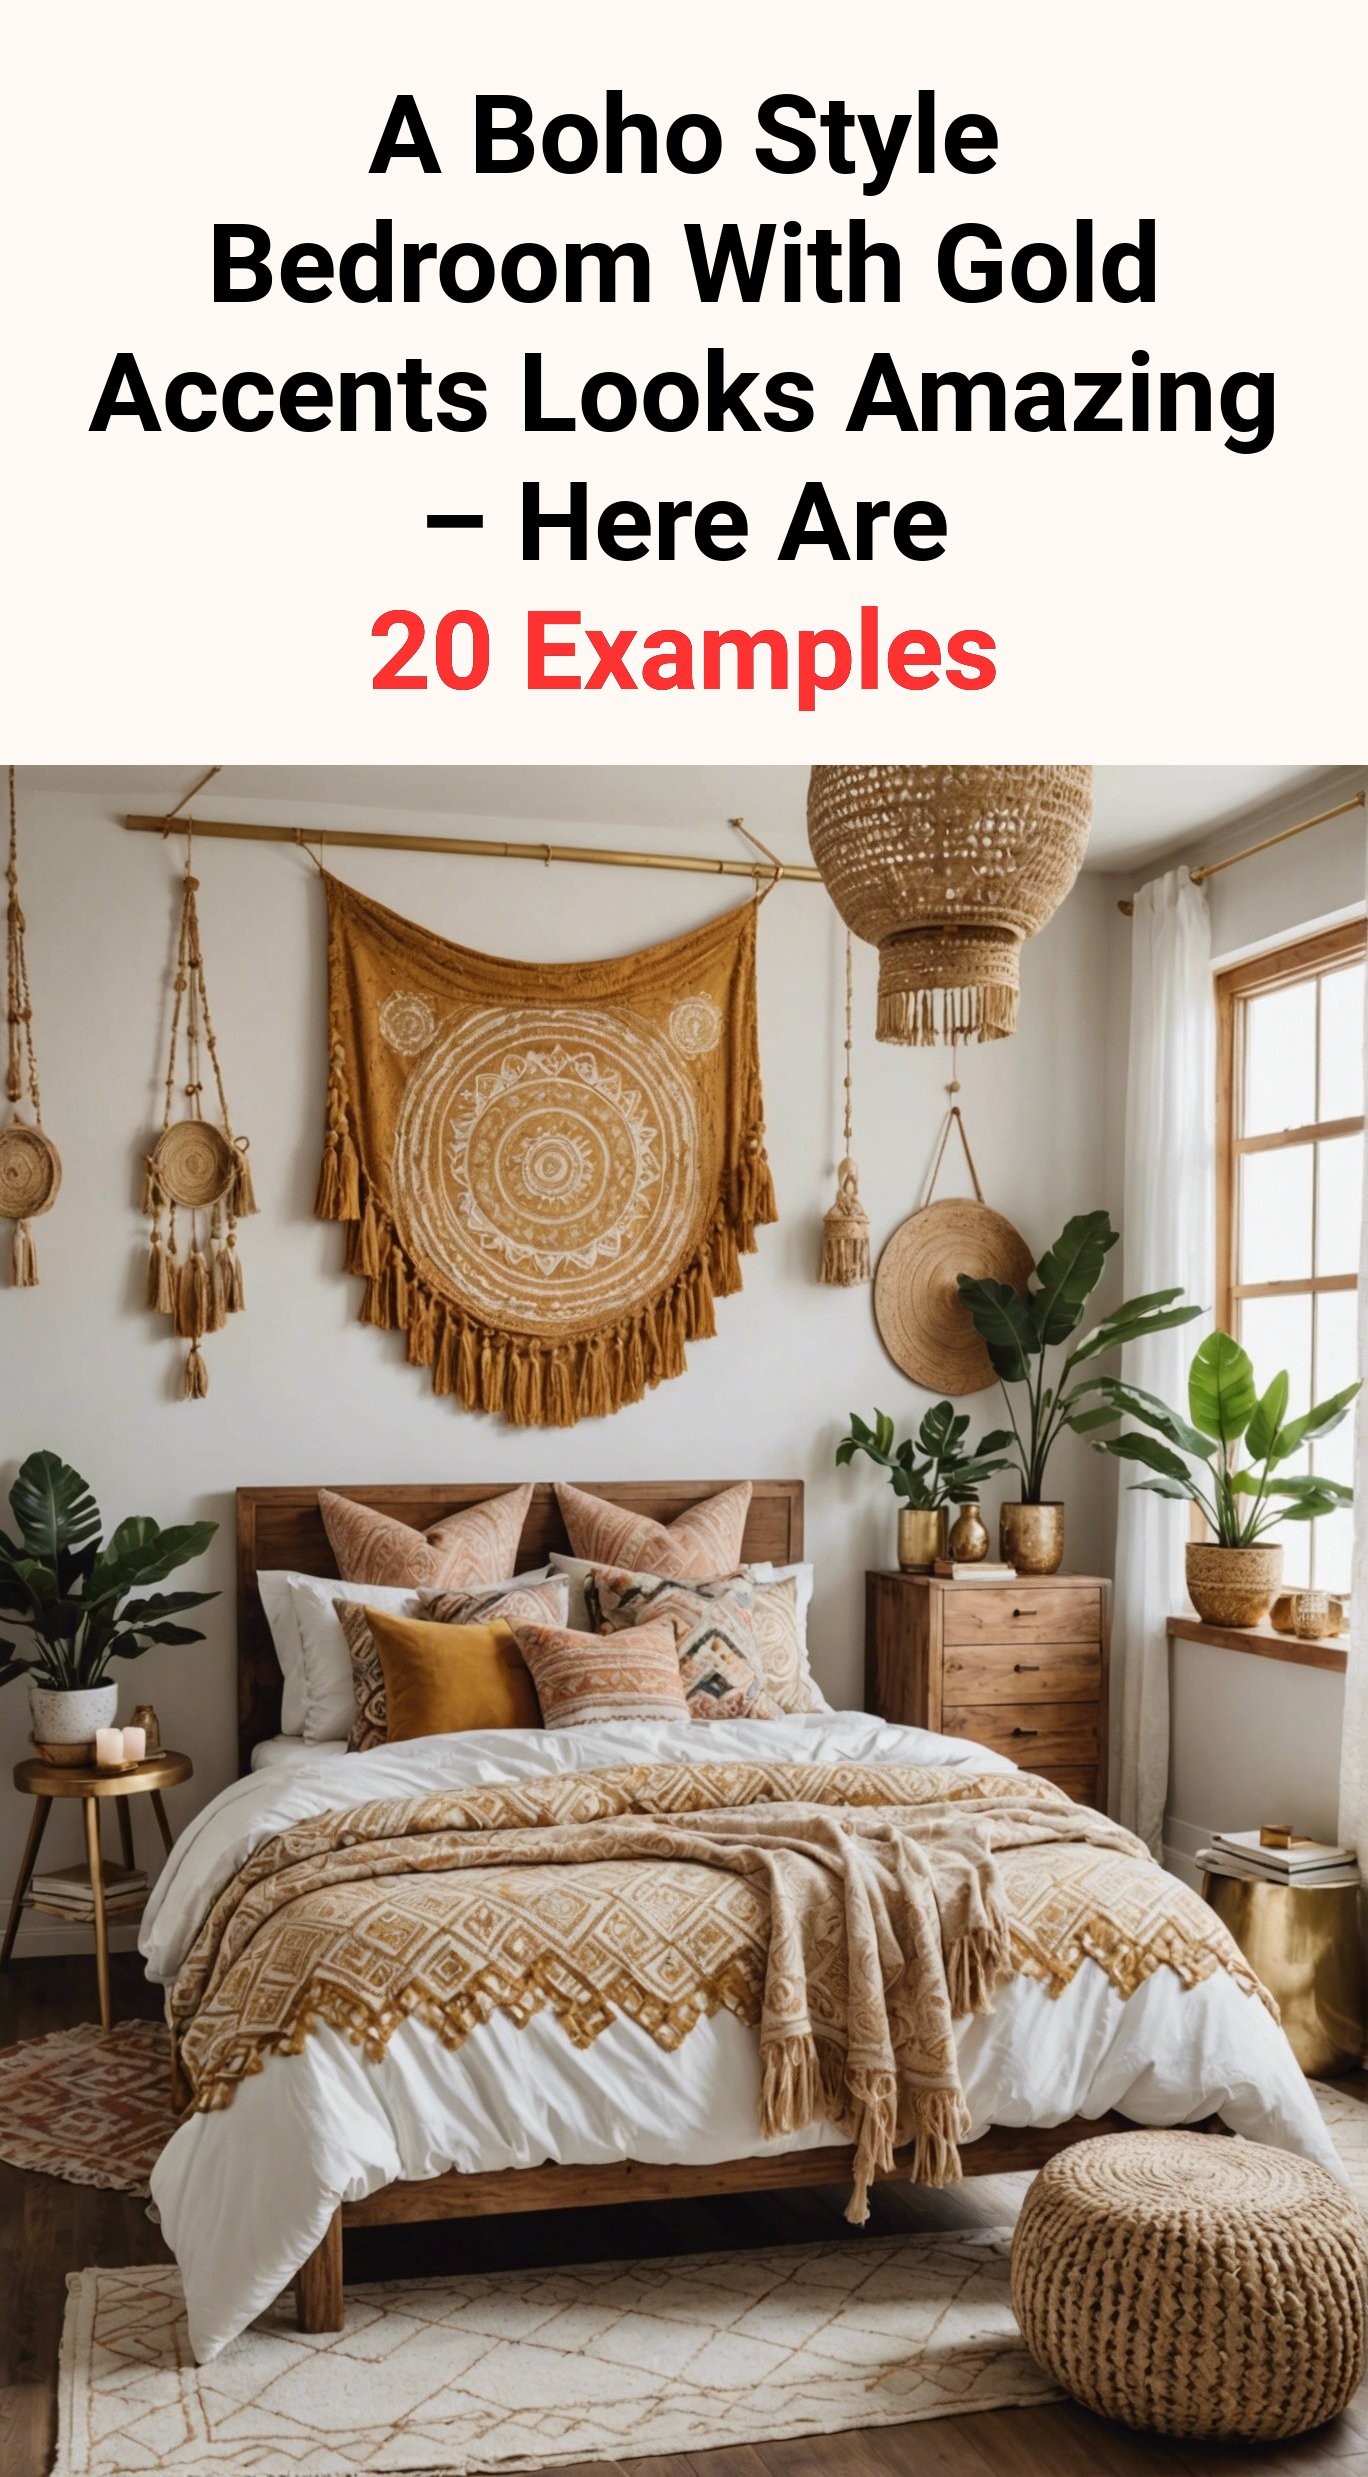 A Boho Style Bedroom With Gold Accents Looks Amazing – Here Are 20 Examples